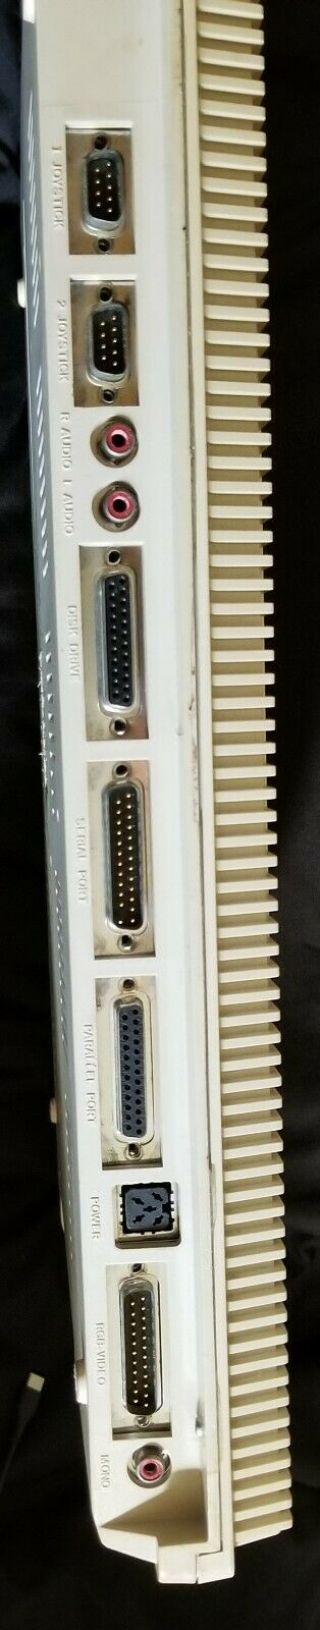 Amiga 500 computer great with power supply 6